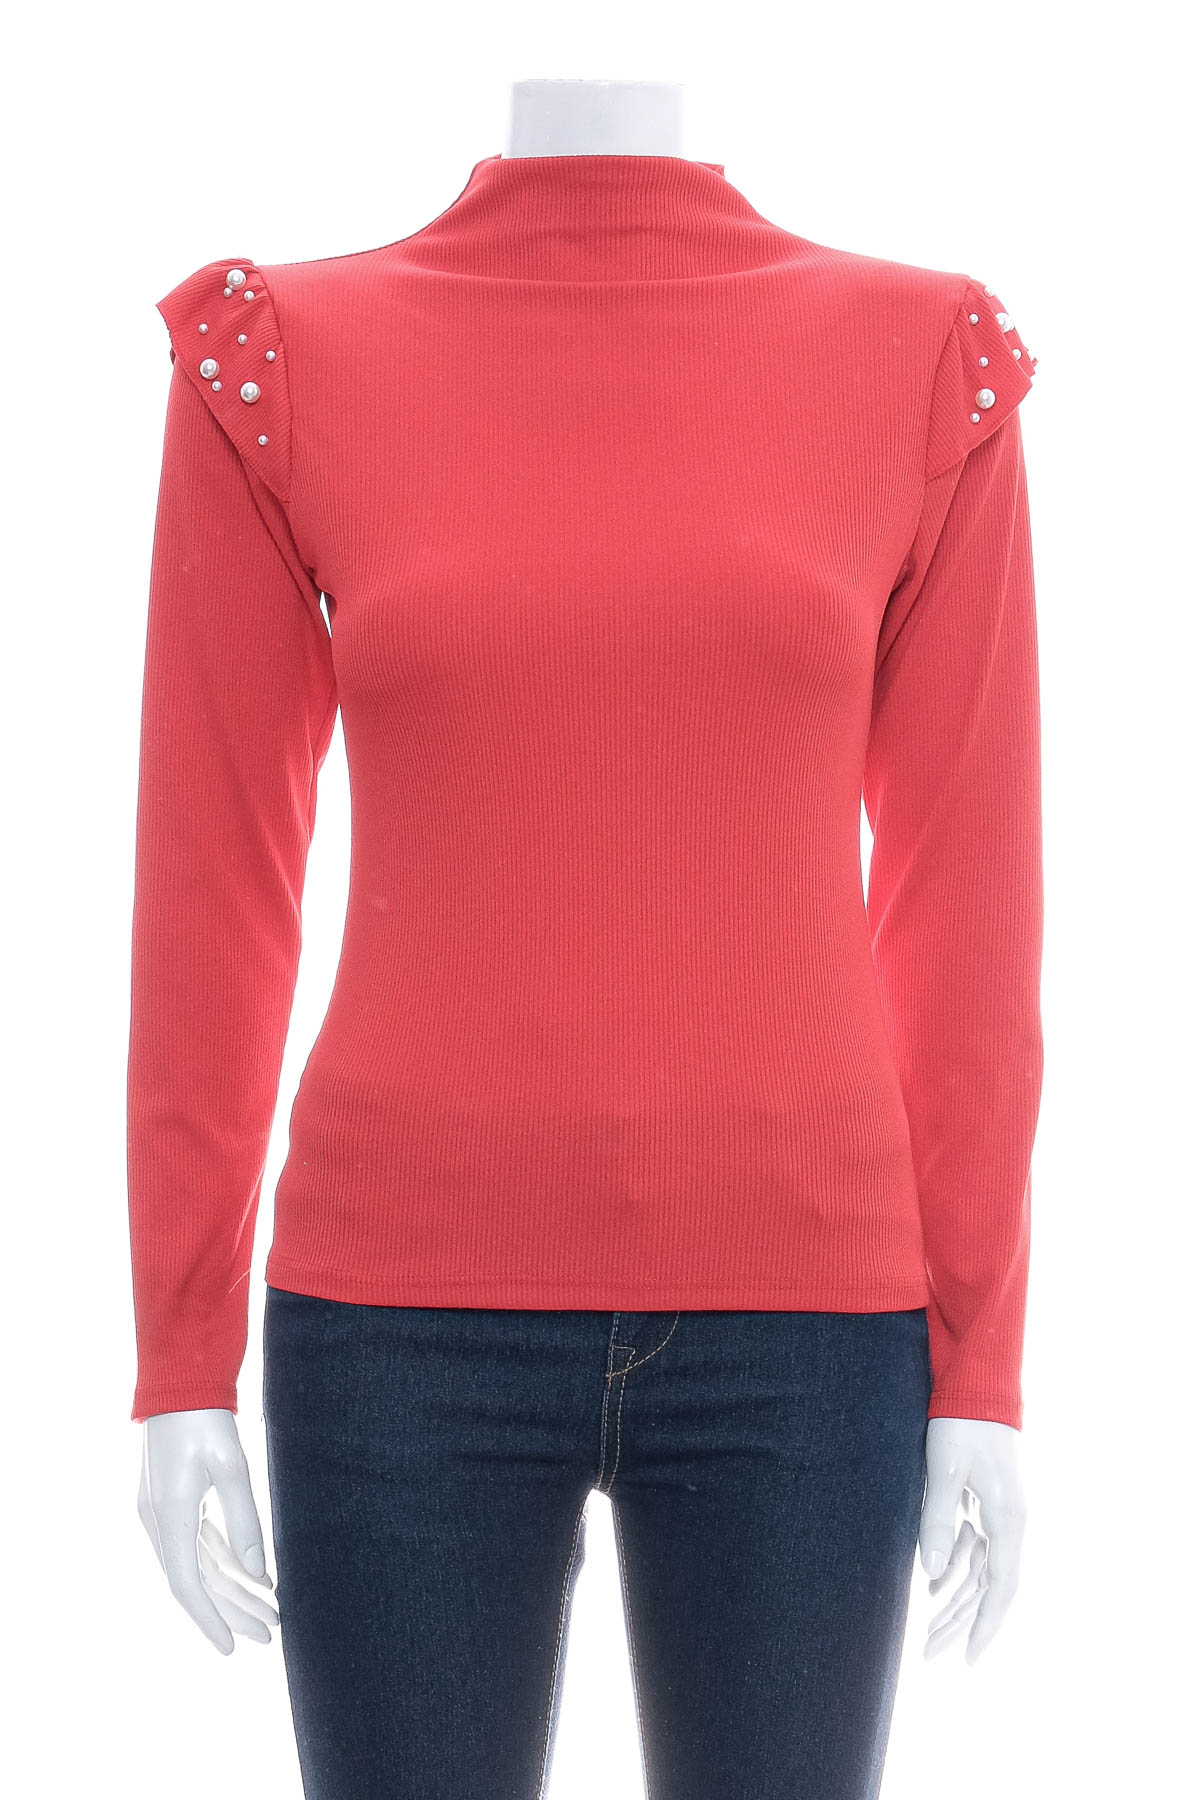 Women's blouse - NEW COLLECTION - 0